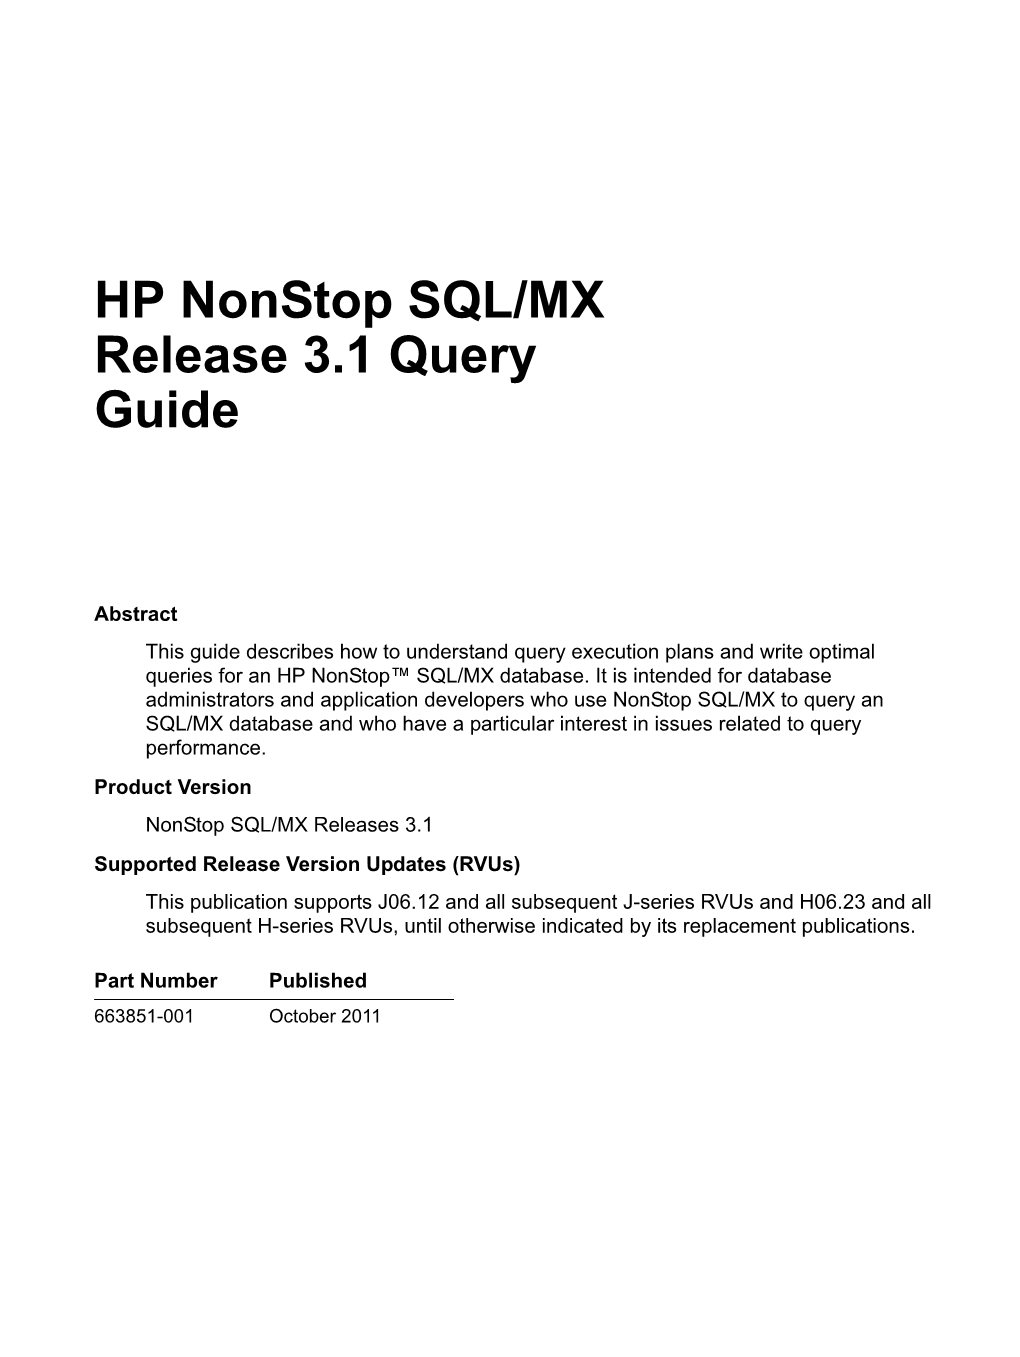 HP Nonstop SQL/MX Release 3.1 Query Guide